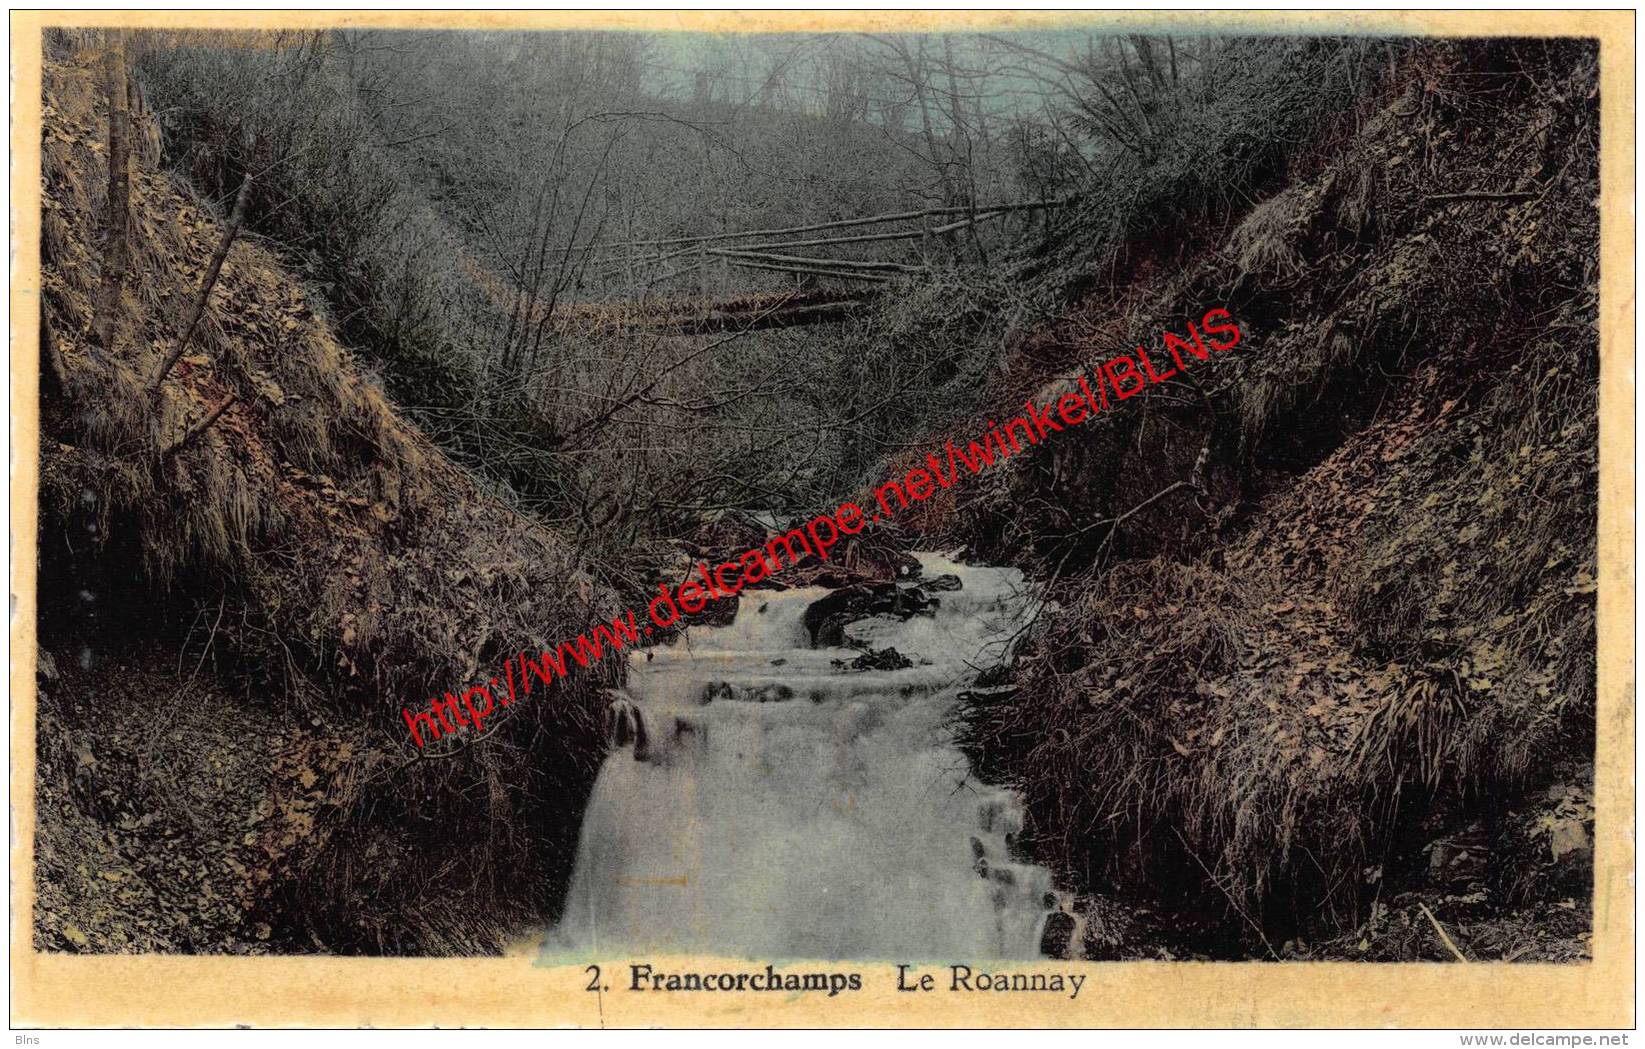 Le Roannay - Francorchamps - Stavelot